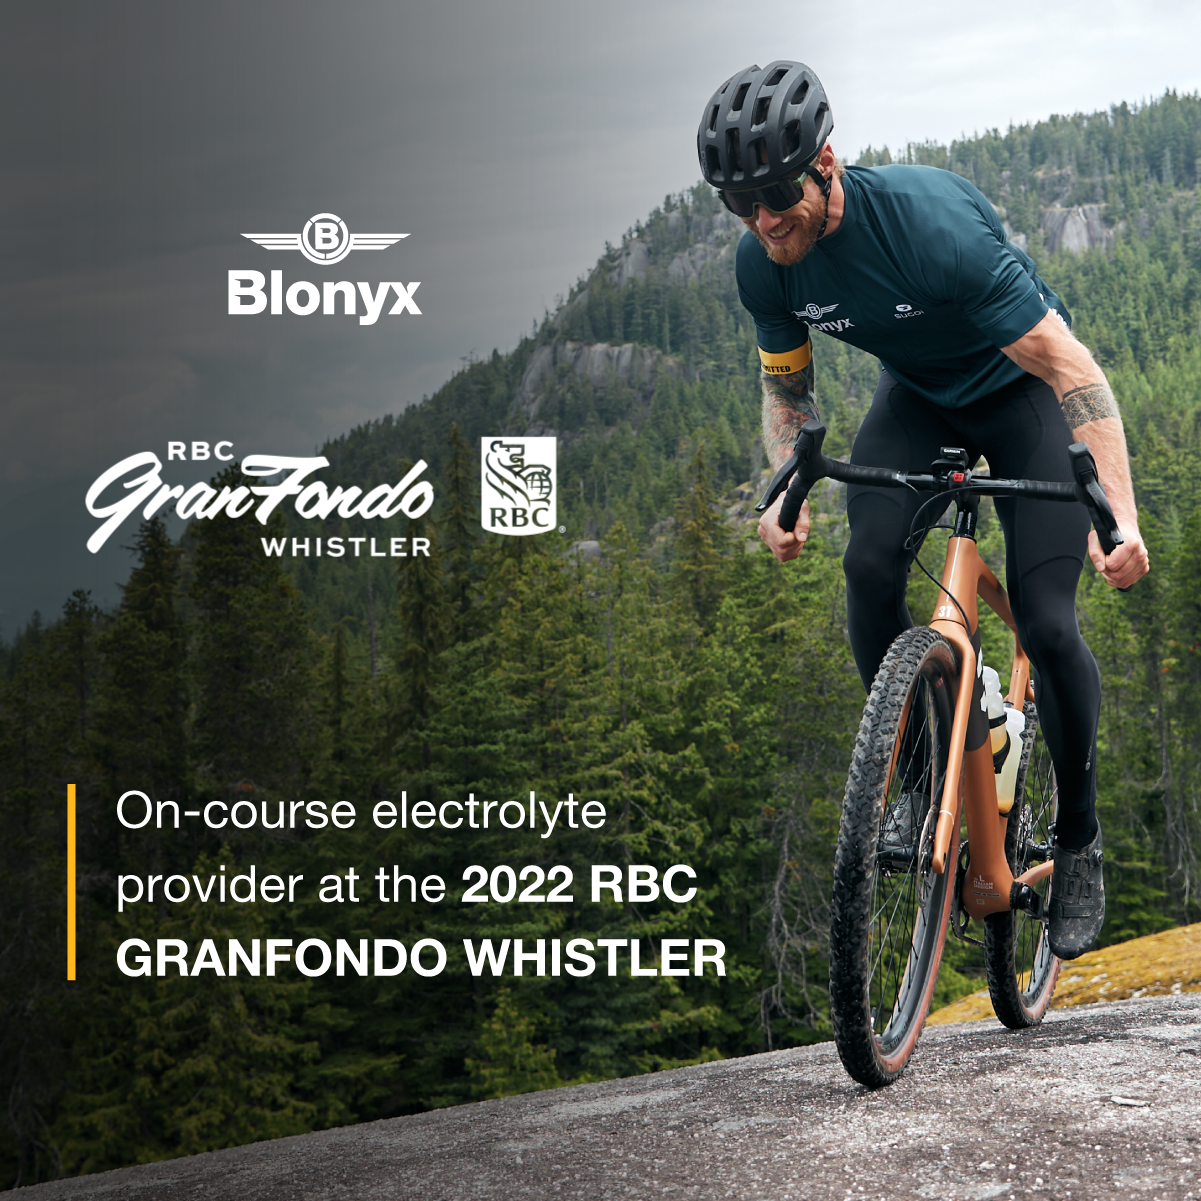 North Vancouver-Based Blonyx Chosen to Provide Electrolyte Drinks to Riders at This Year’s RBC GranFondo Whistler